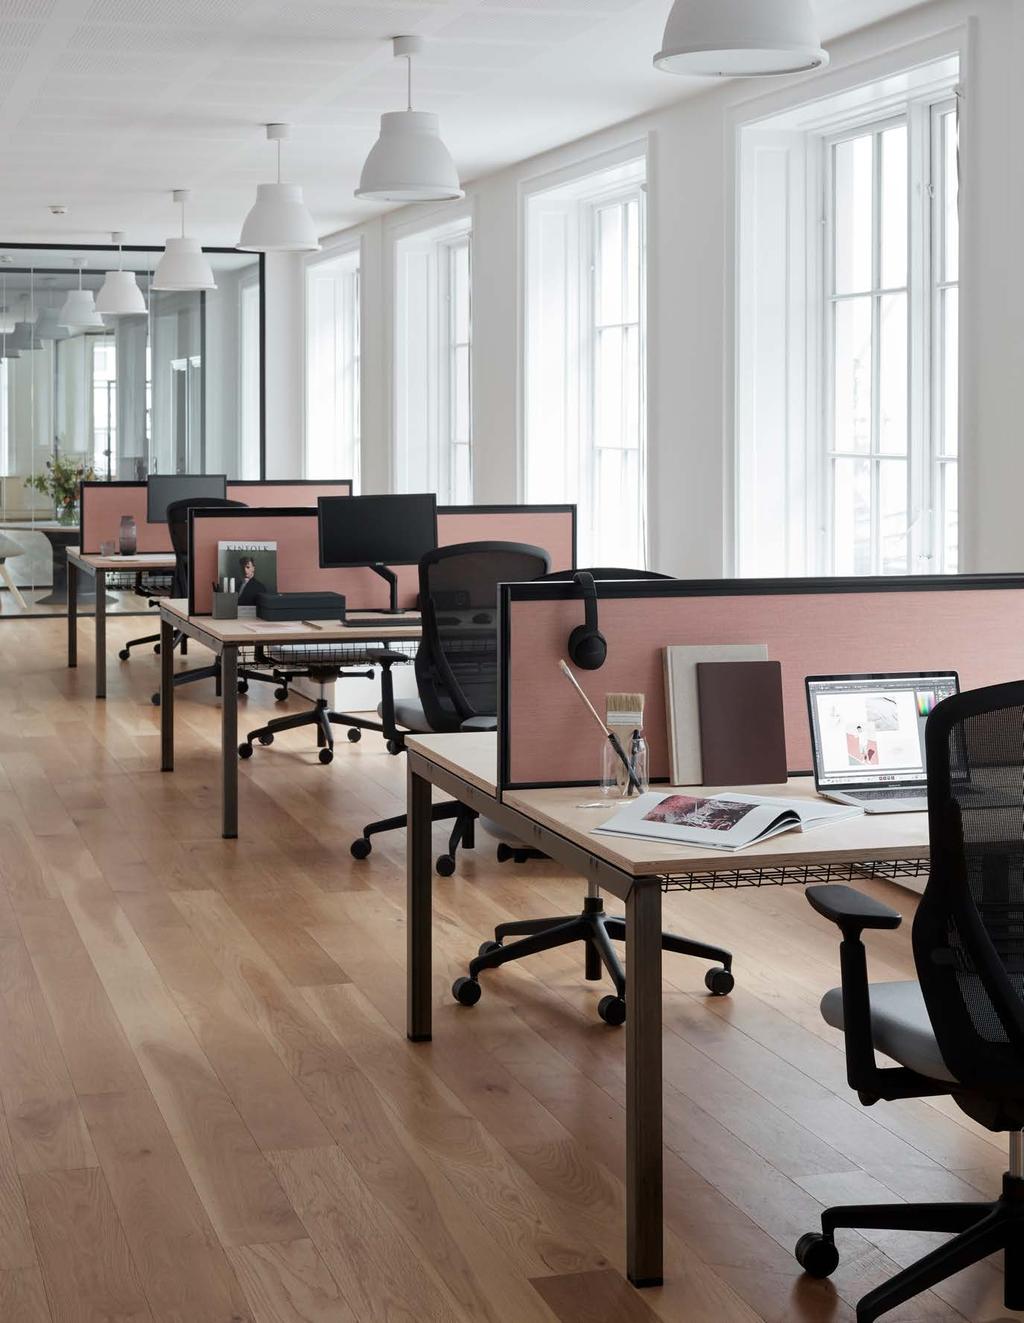 that form touch down workstations or meeting spaces.